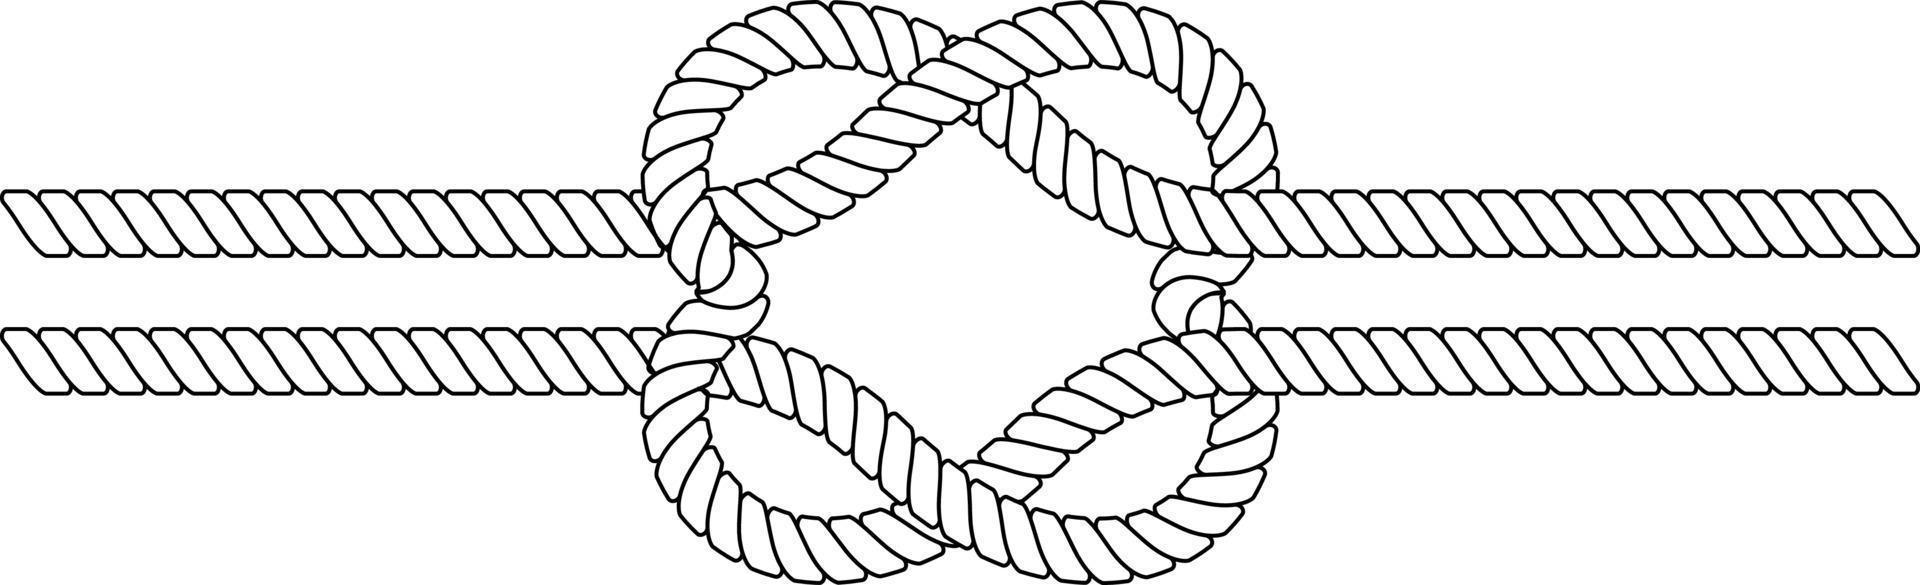 Rope knot in the shape of hearts vector